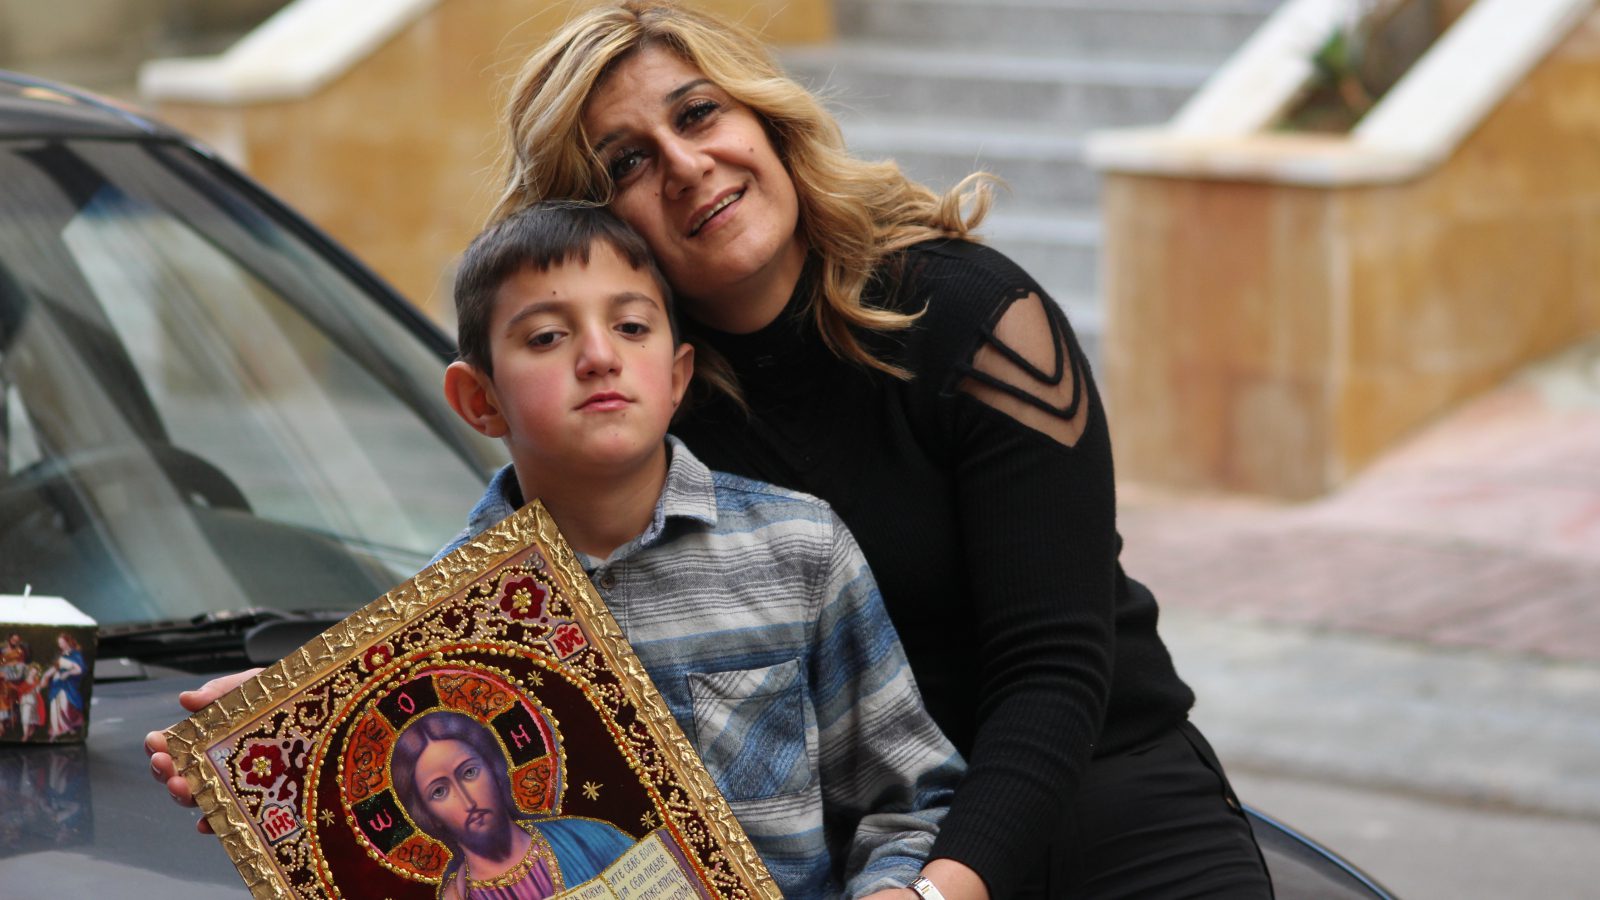 Faten Merhi and her son Loubnan pose on the hood of their car with 3 works created by Faten during the workshop given by the NGO La Voix de la Femme and funded by the EU as part of the DAWRIC project. Chiyah, Lebanon